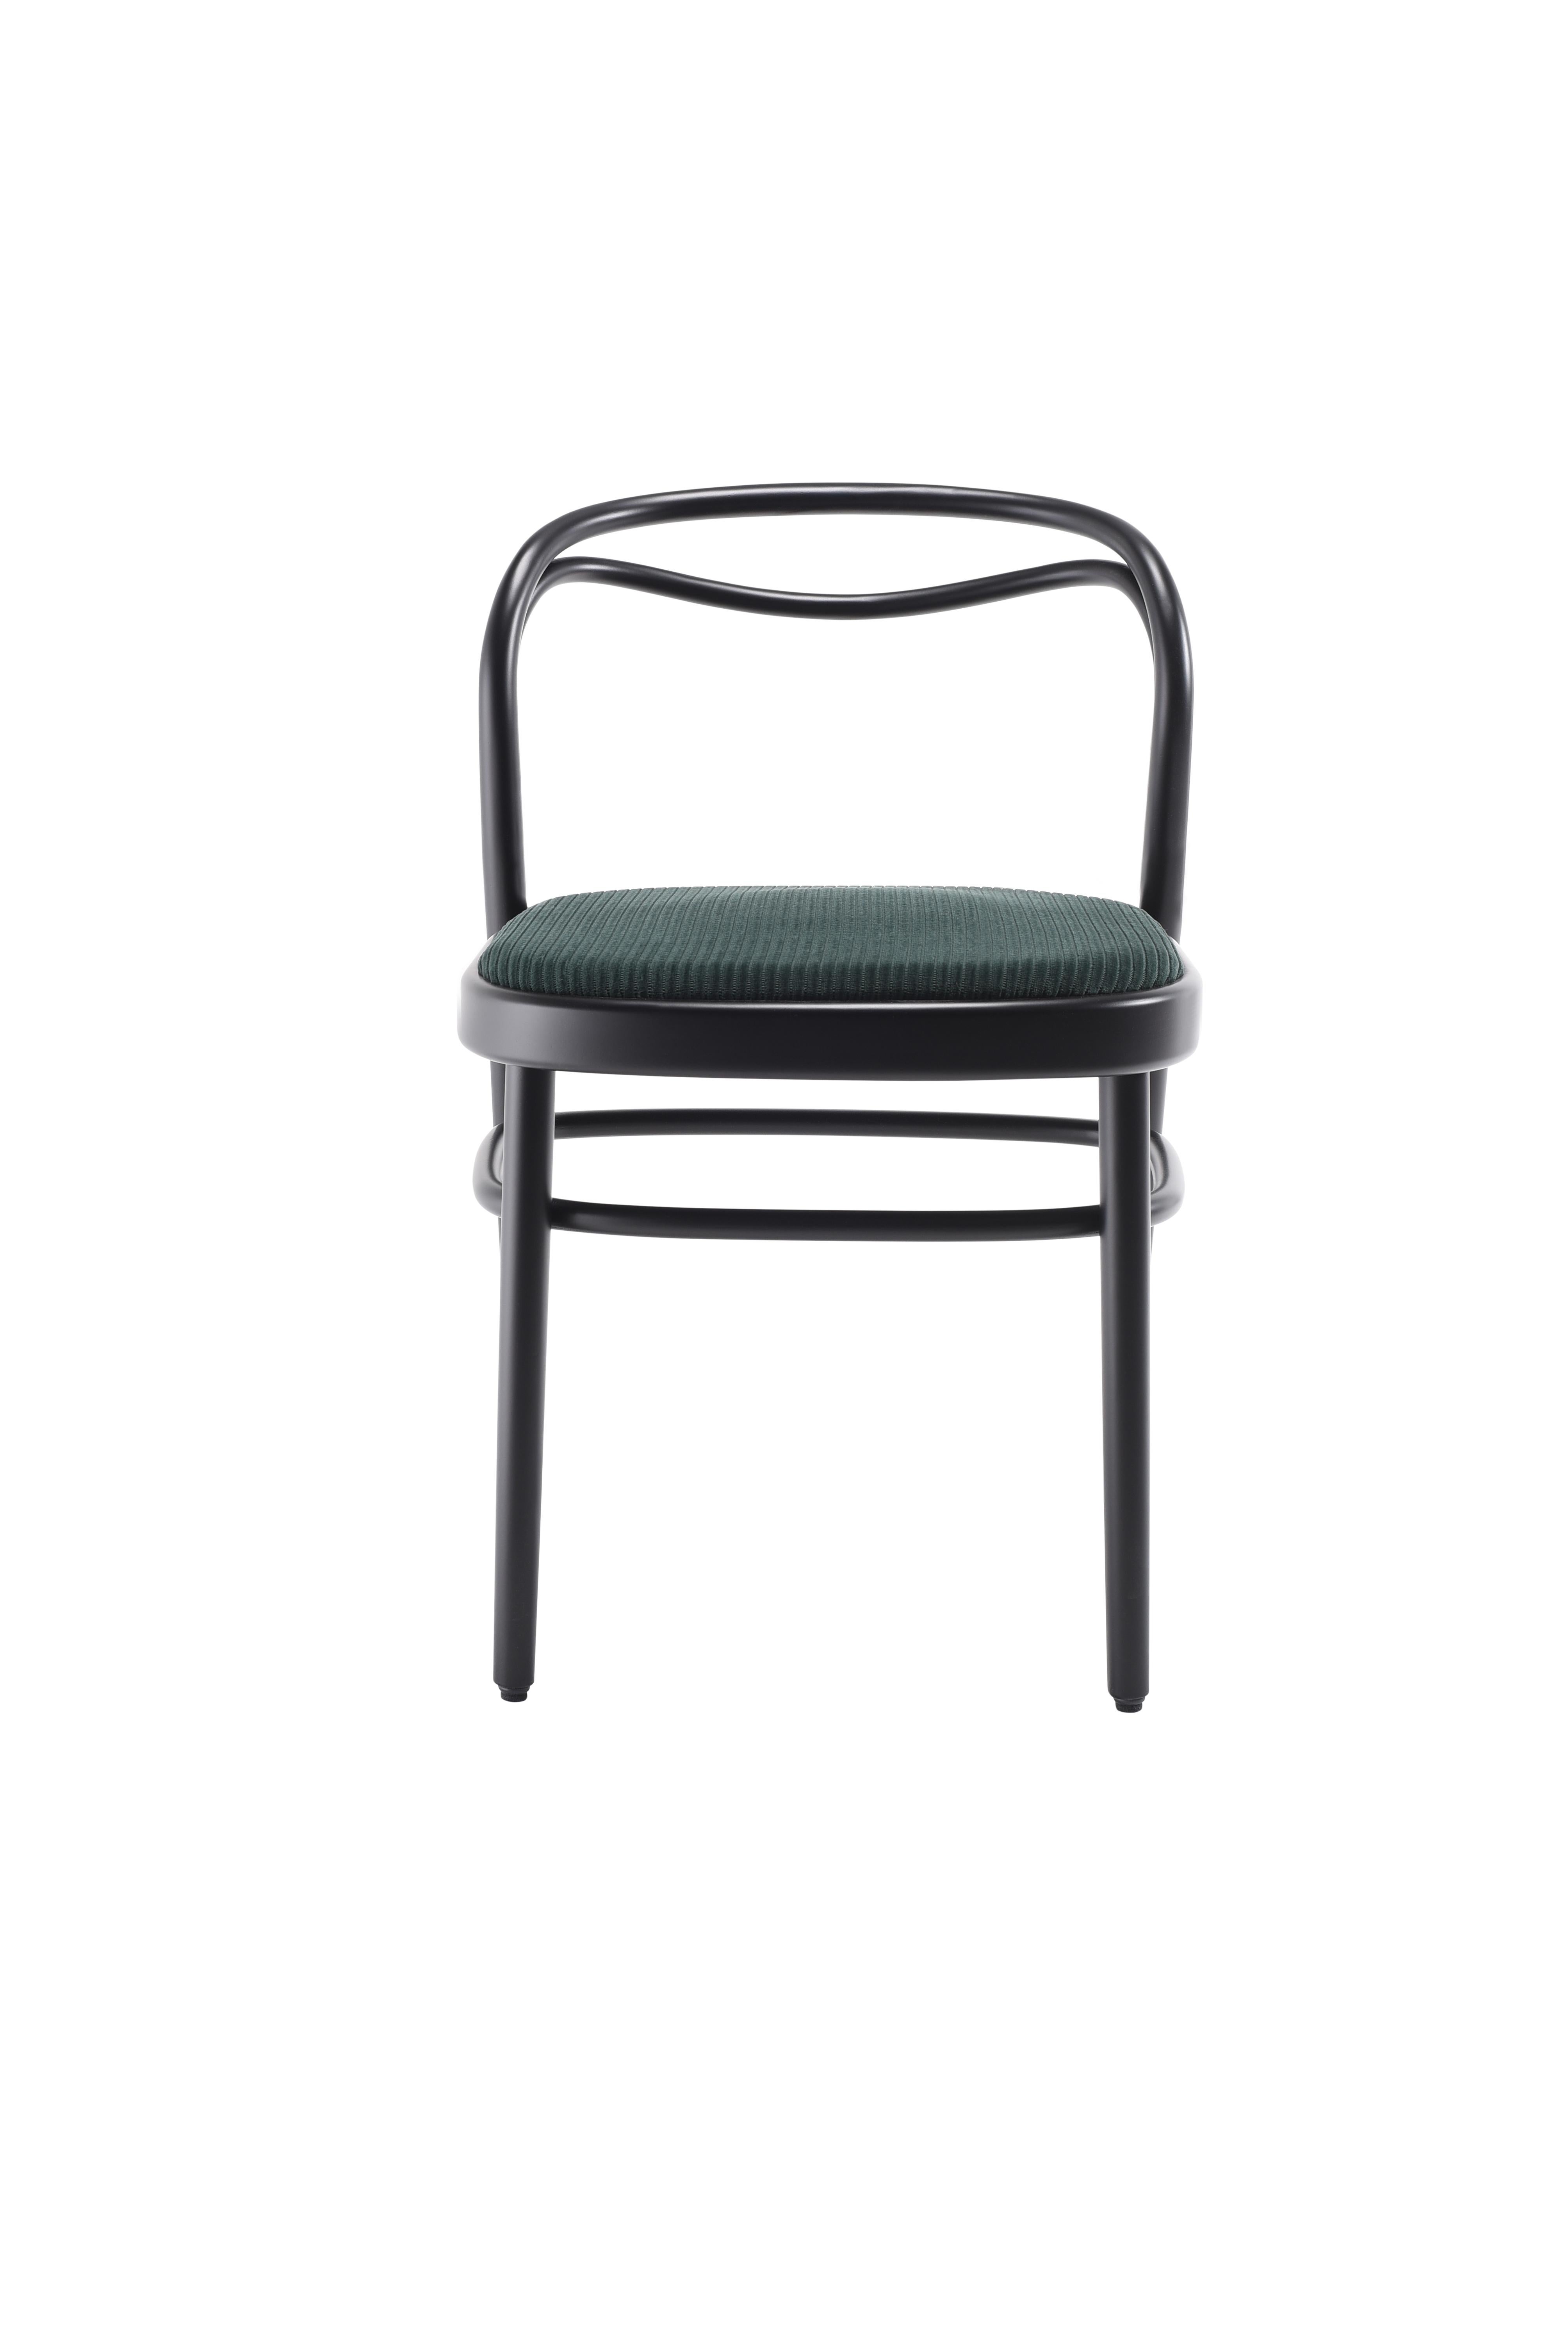 Gebrüder Thonet Vienna Beaulieu Chair with Upholstered Seat by Philippe Nigro In New Condition For Sale In Brooklyn, NY